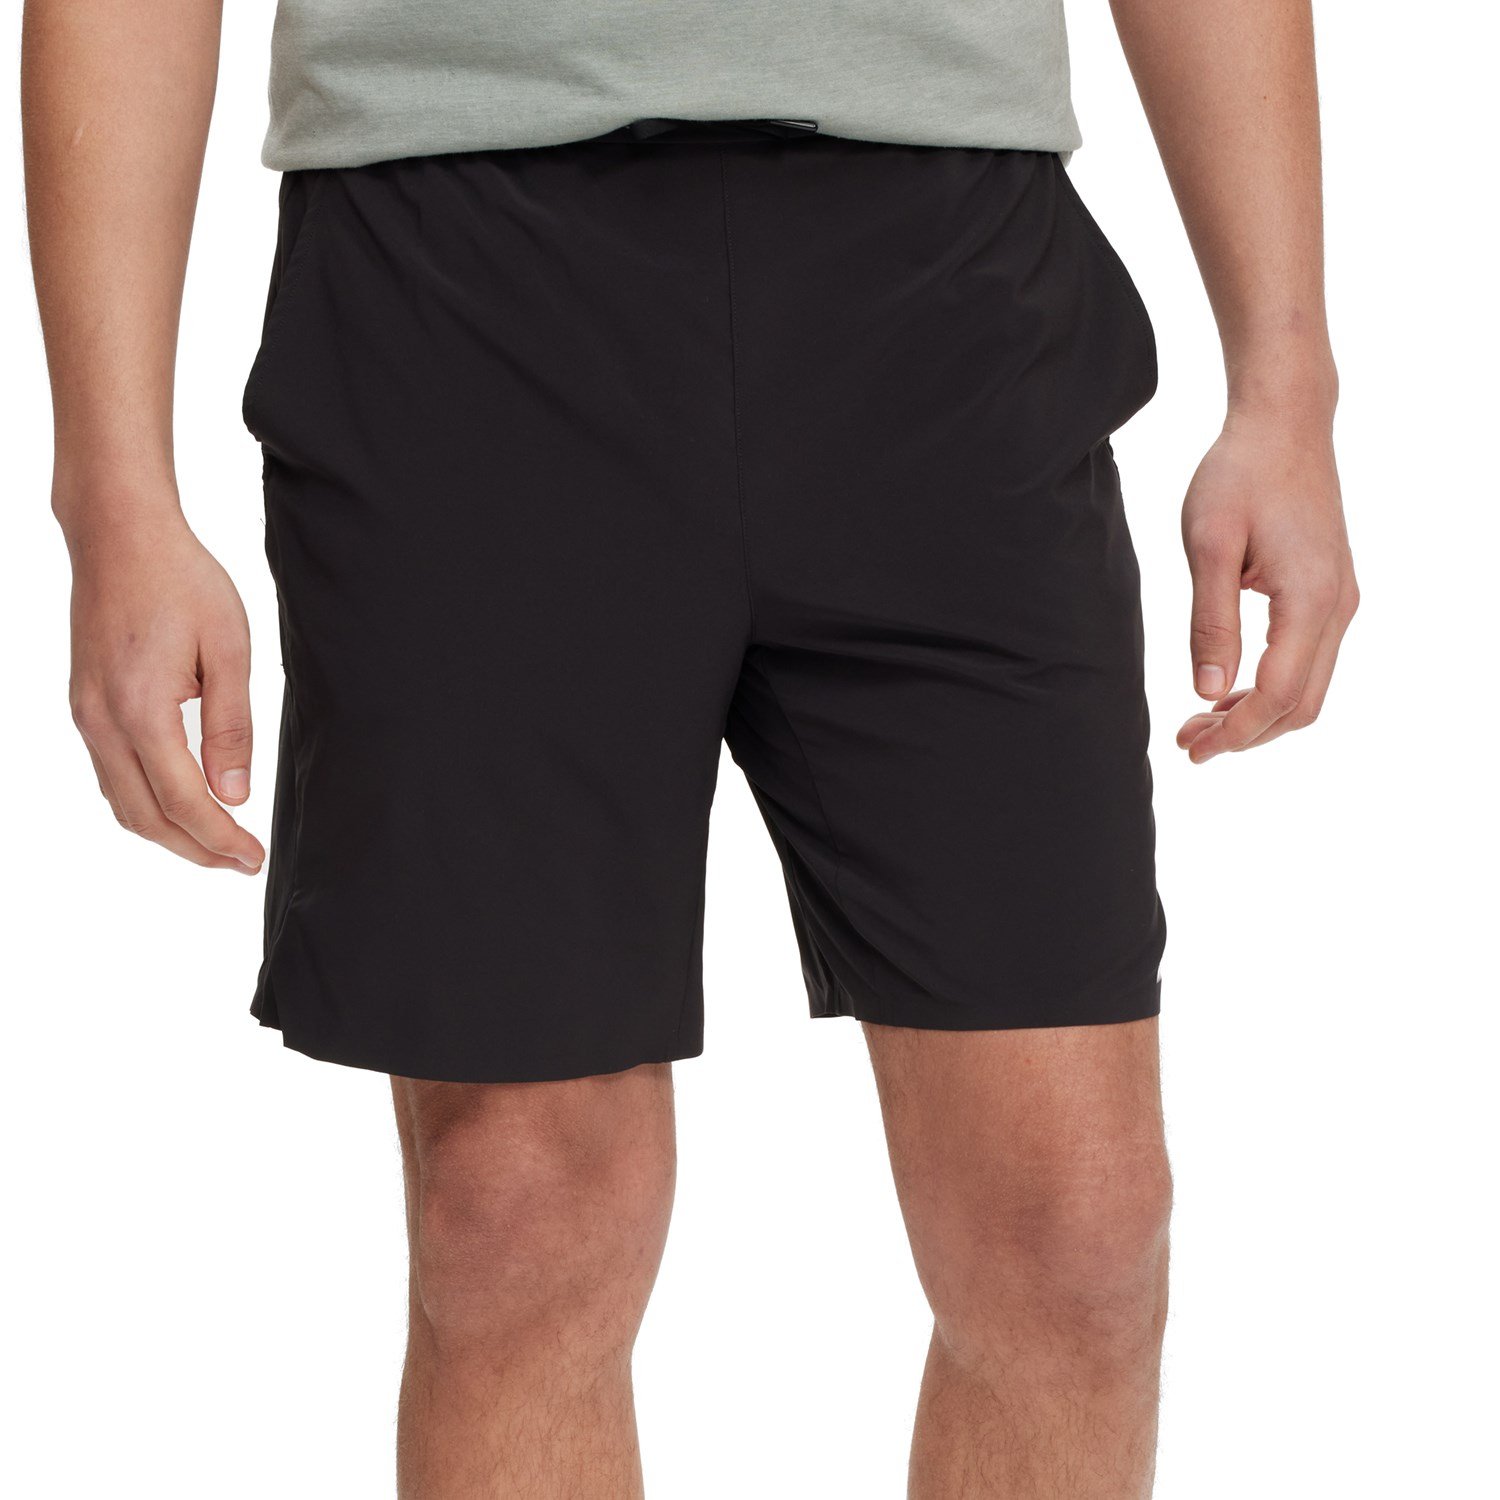 Vuori Kore Shorts Review: The most comfortable shorts I've ever owned - The  Men's Haberdashery